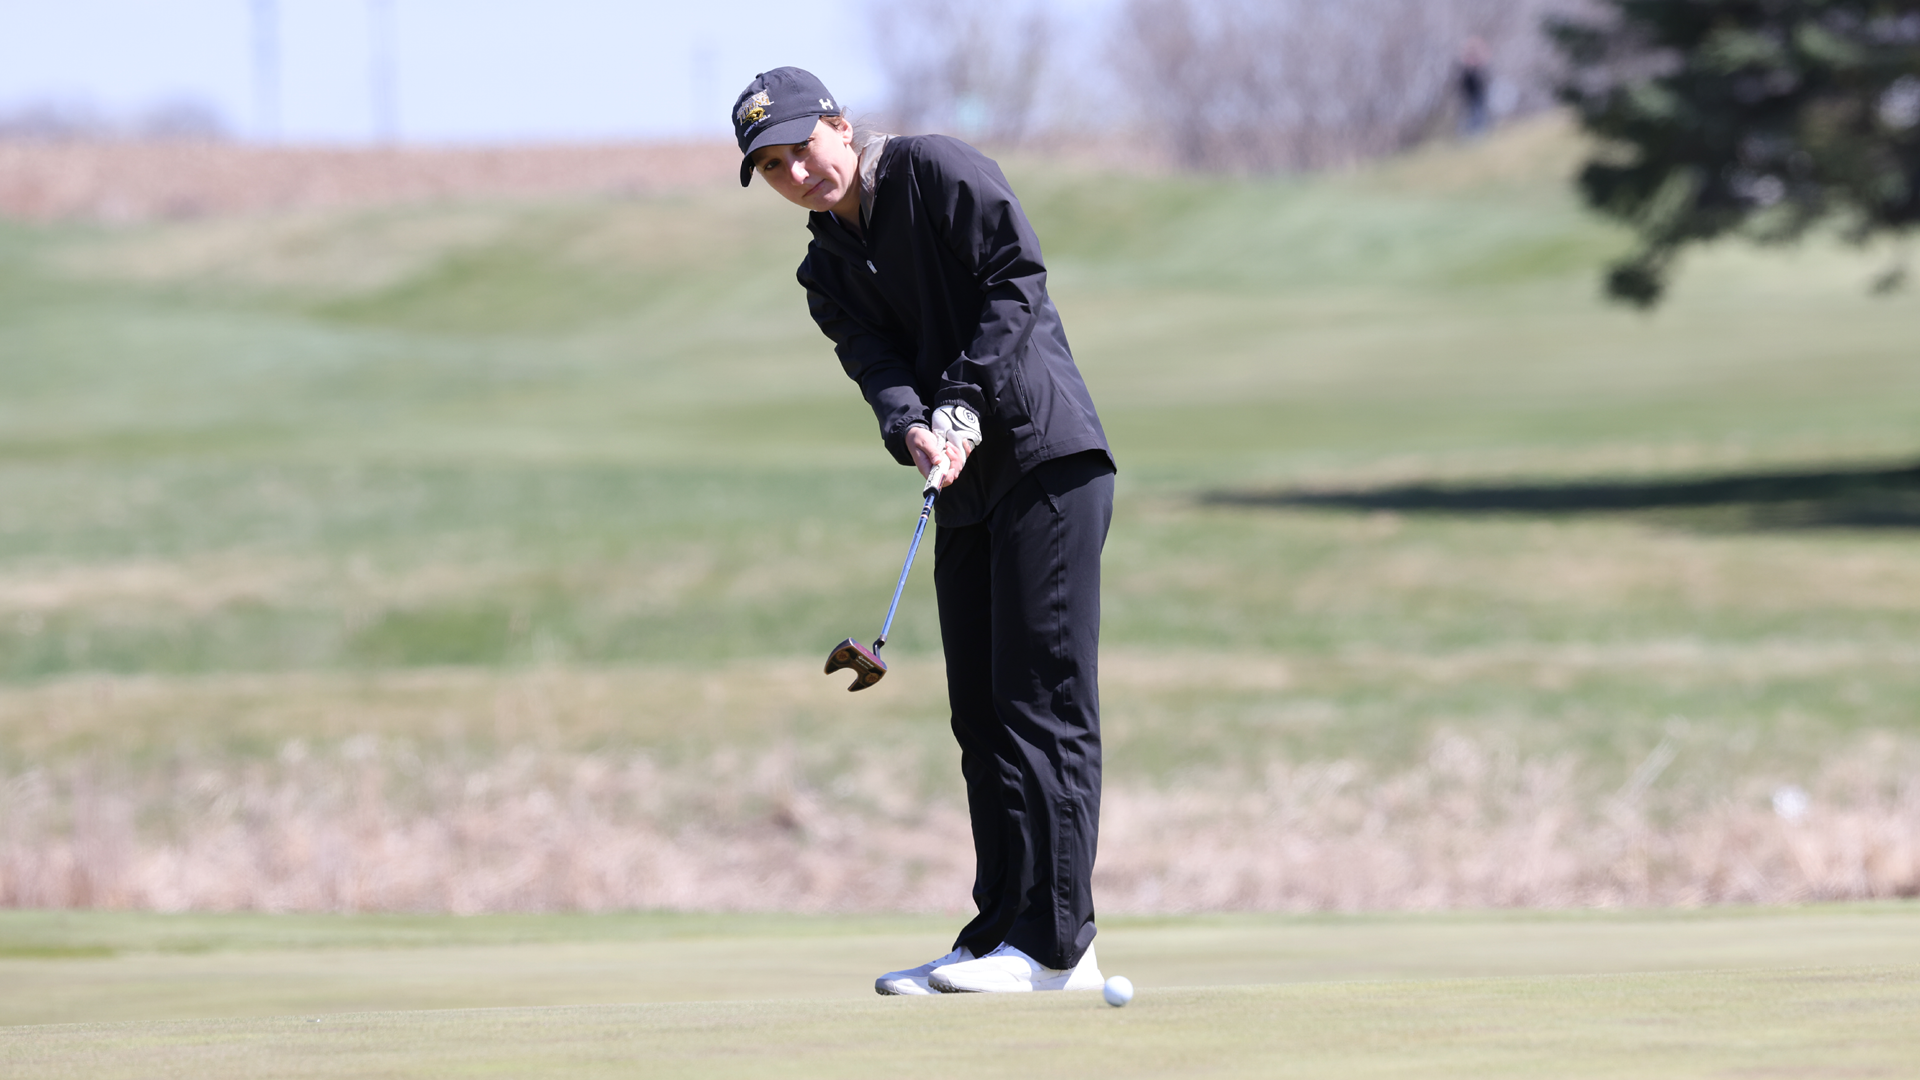 Josie Hofer placed fifth with 91 strokes at the Marian University Spring Invitational on Sunday. Photo Credit: Steve Frommell, UW-Oshkosh Sports Information